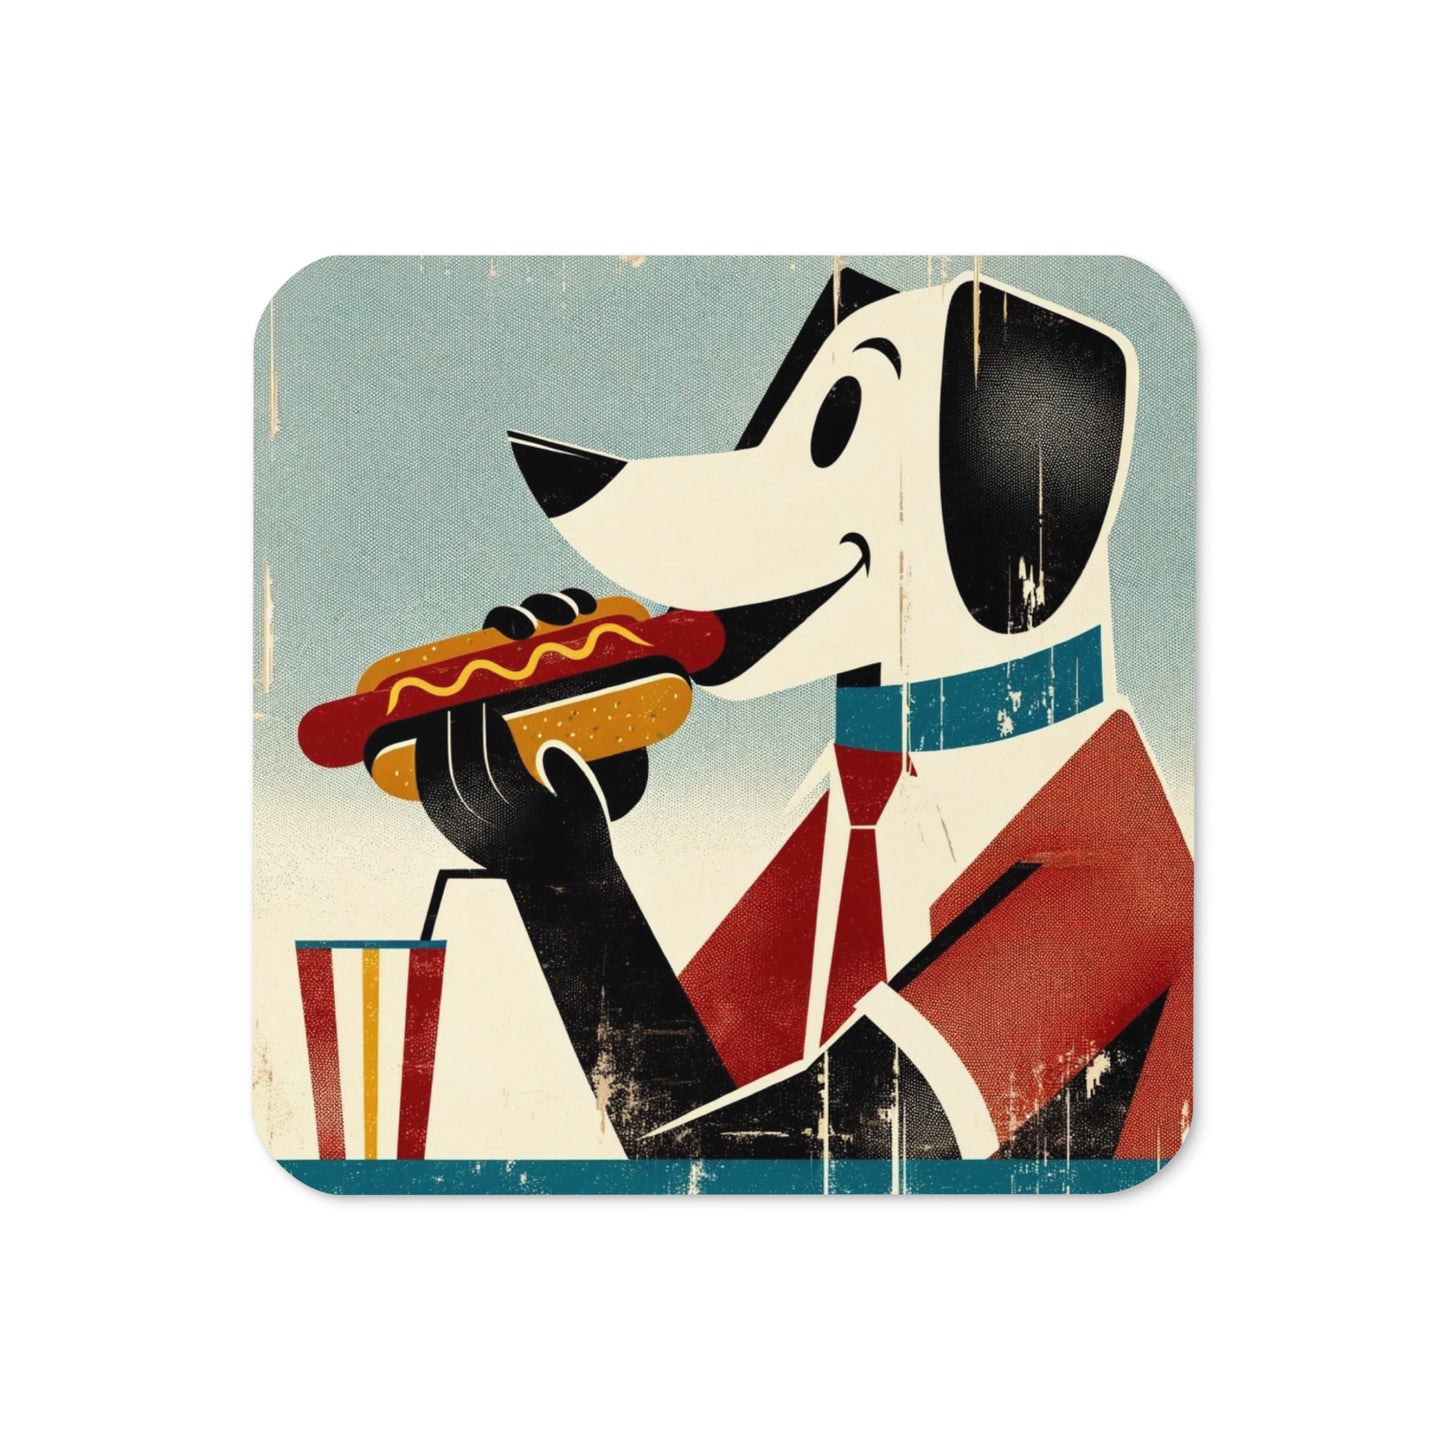 Canine Cravings: The Hot Dog Delight Cork-back coaster